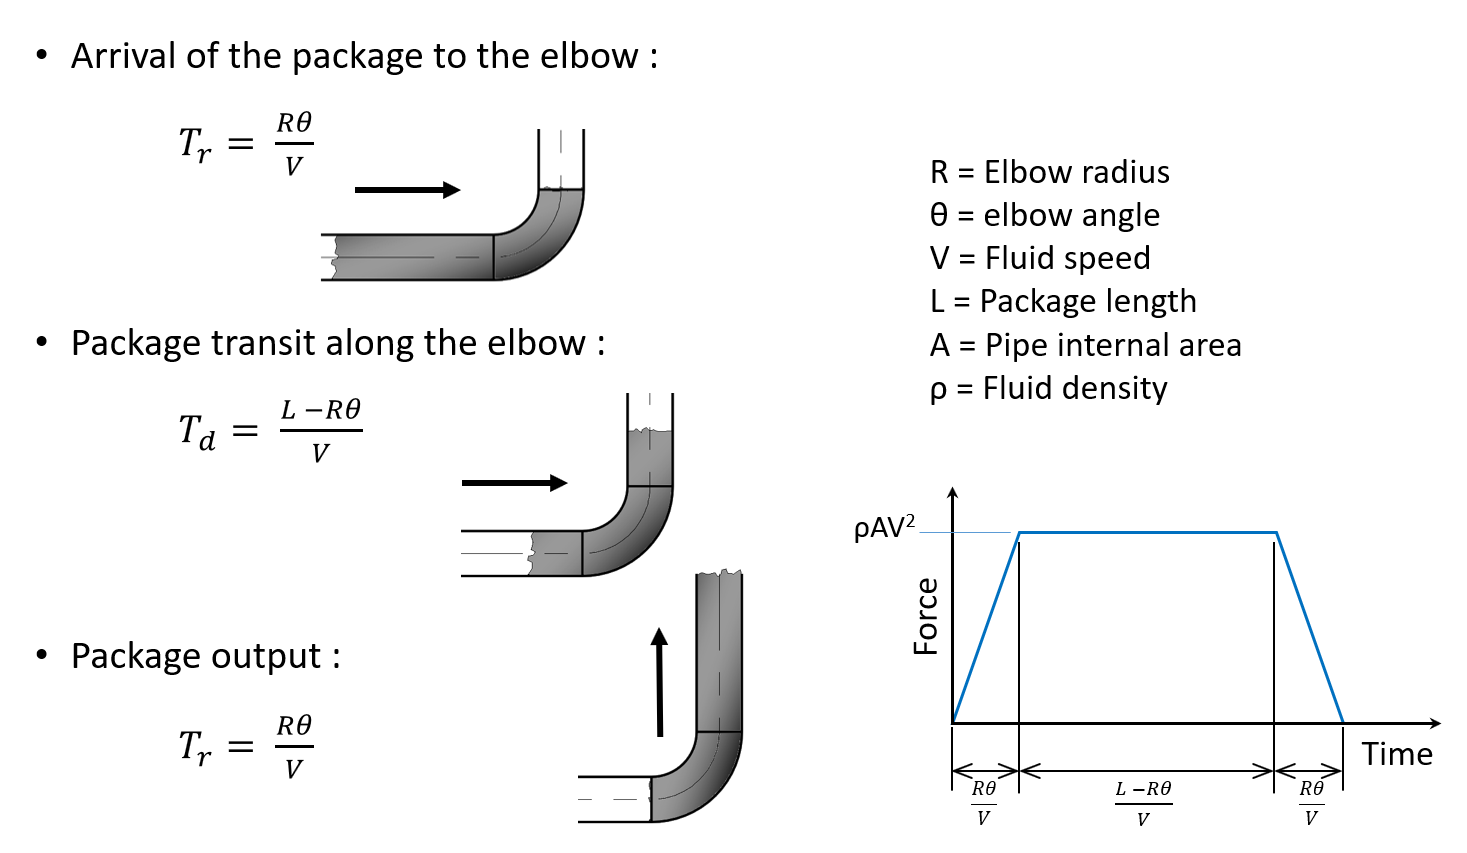 Calculation of unbalanced forces and wave advance in AutoPIPE.